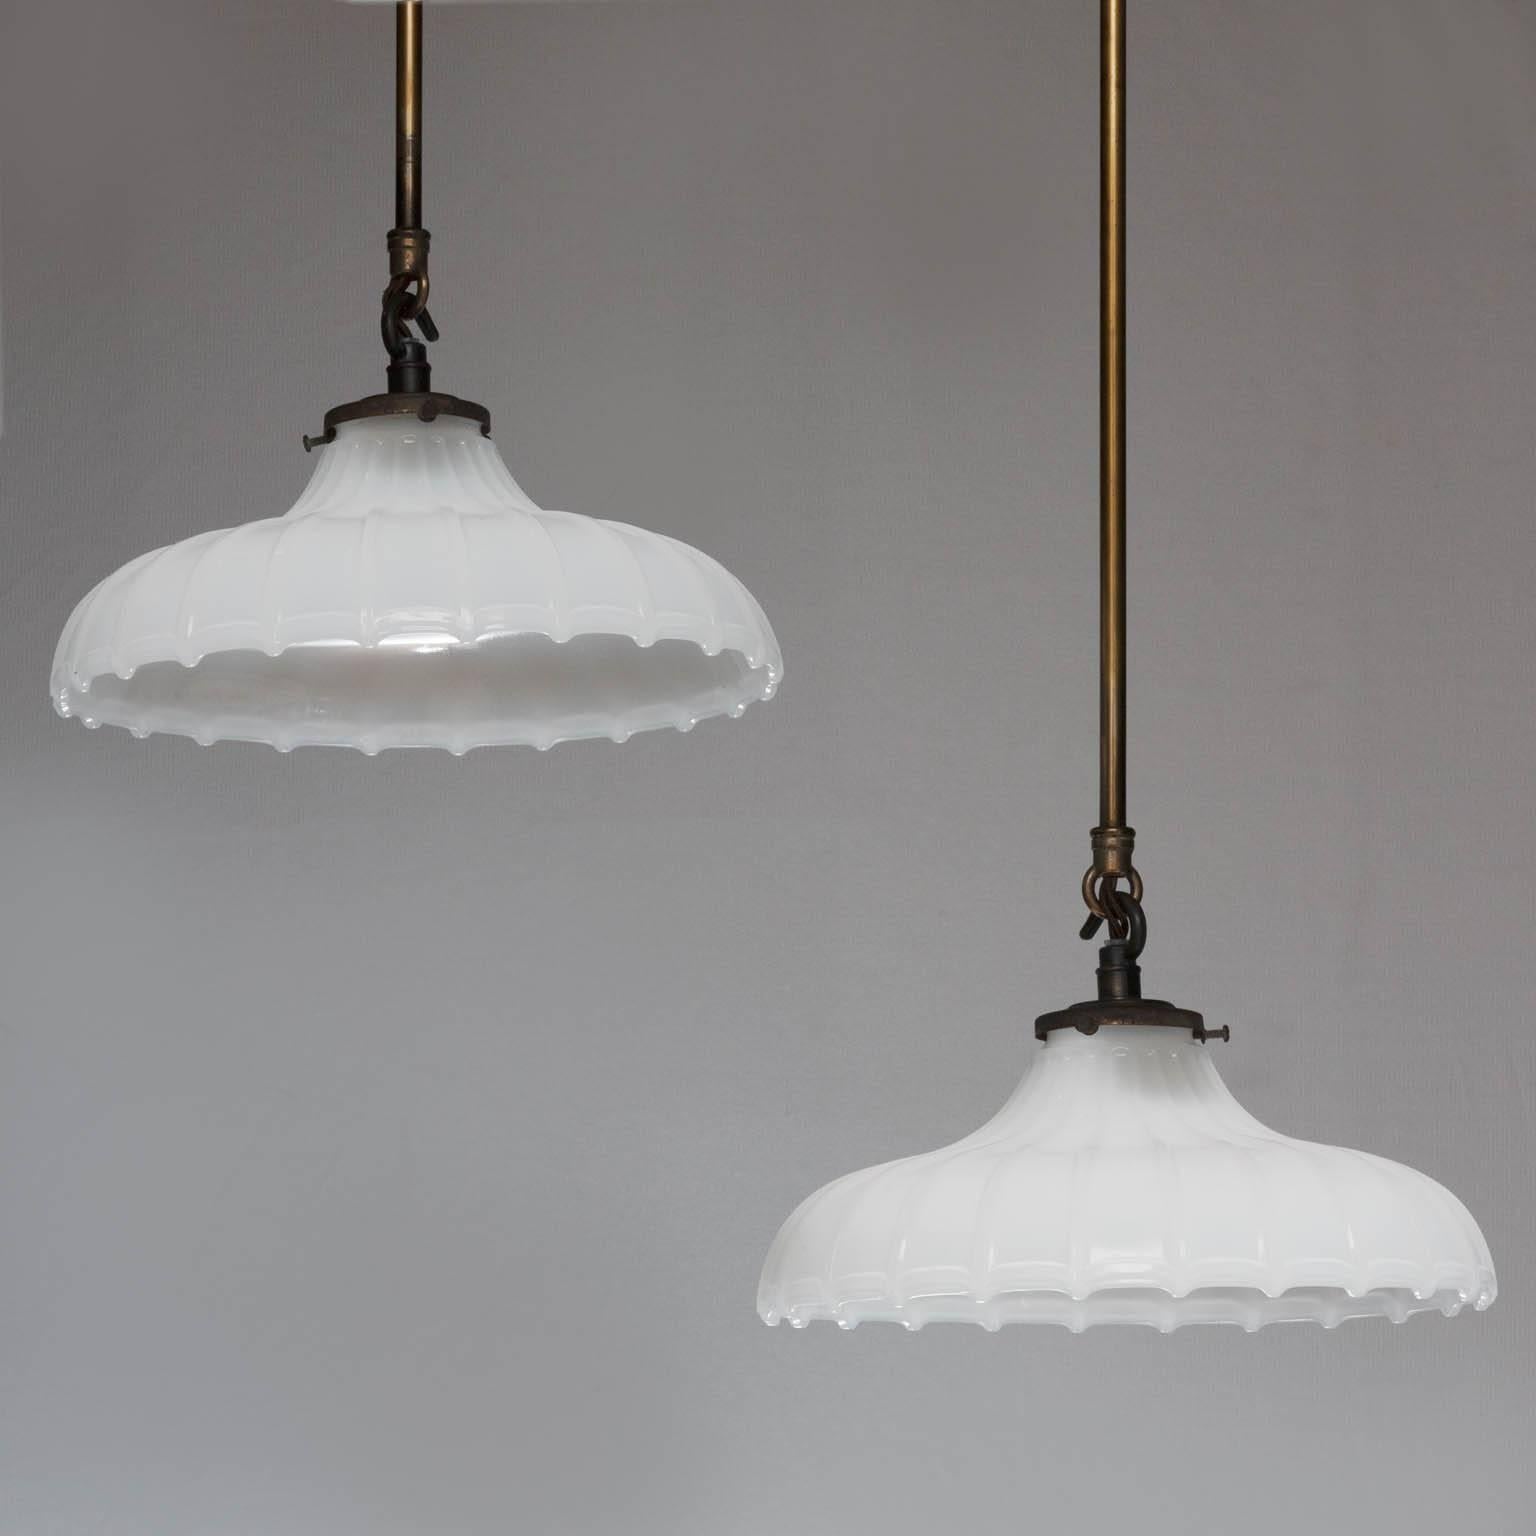 A pair of late 19th century milk glass ribbed shades with black bronze galleries and mounts, hung on two rods. Currently electrified for the UK.

We are members of LAPADA and CINOA.